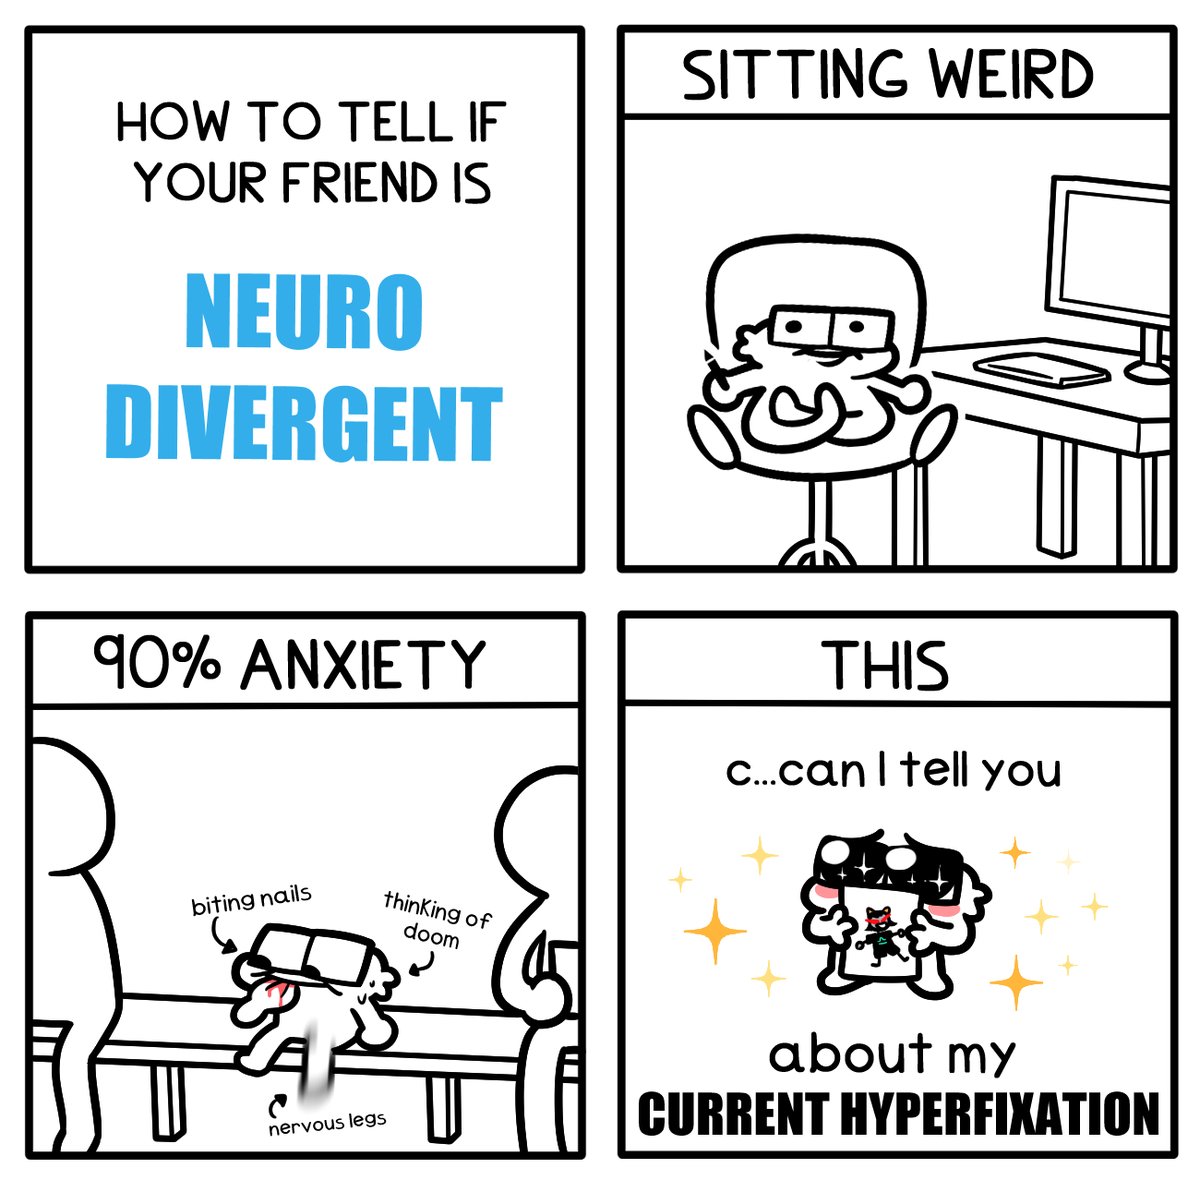 An incorrect comic about neurodivergent people 